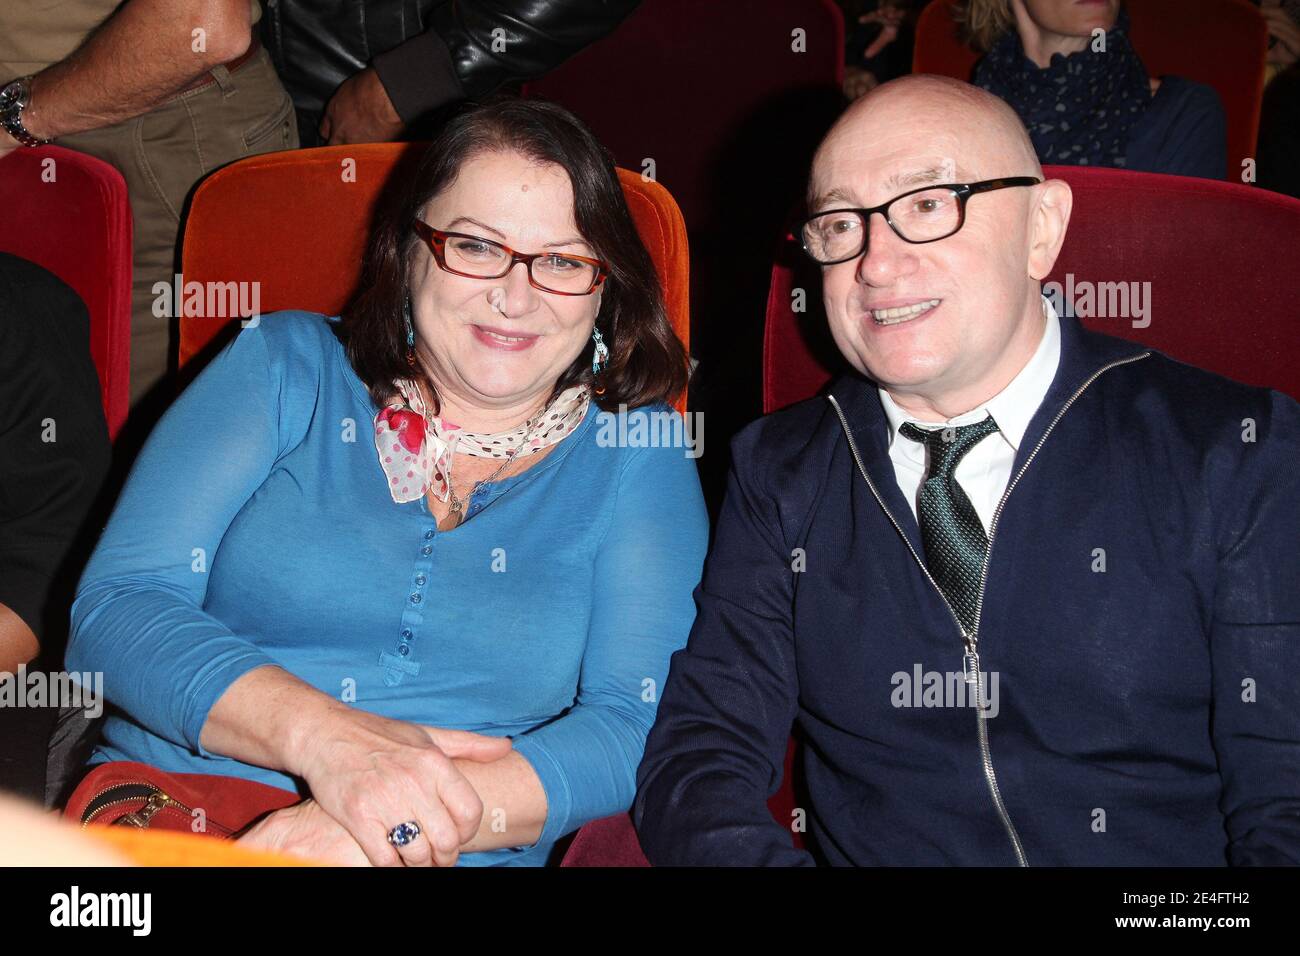 Josiane Balasko and Michel Blanc attending the premiere of 'Rose Et Noir' held at the Elysees Biarritz theater in Paris, France on October 13, 2009. Photo by Denis Guignebourg/ABACAPRESS.COM Stock Photo